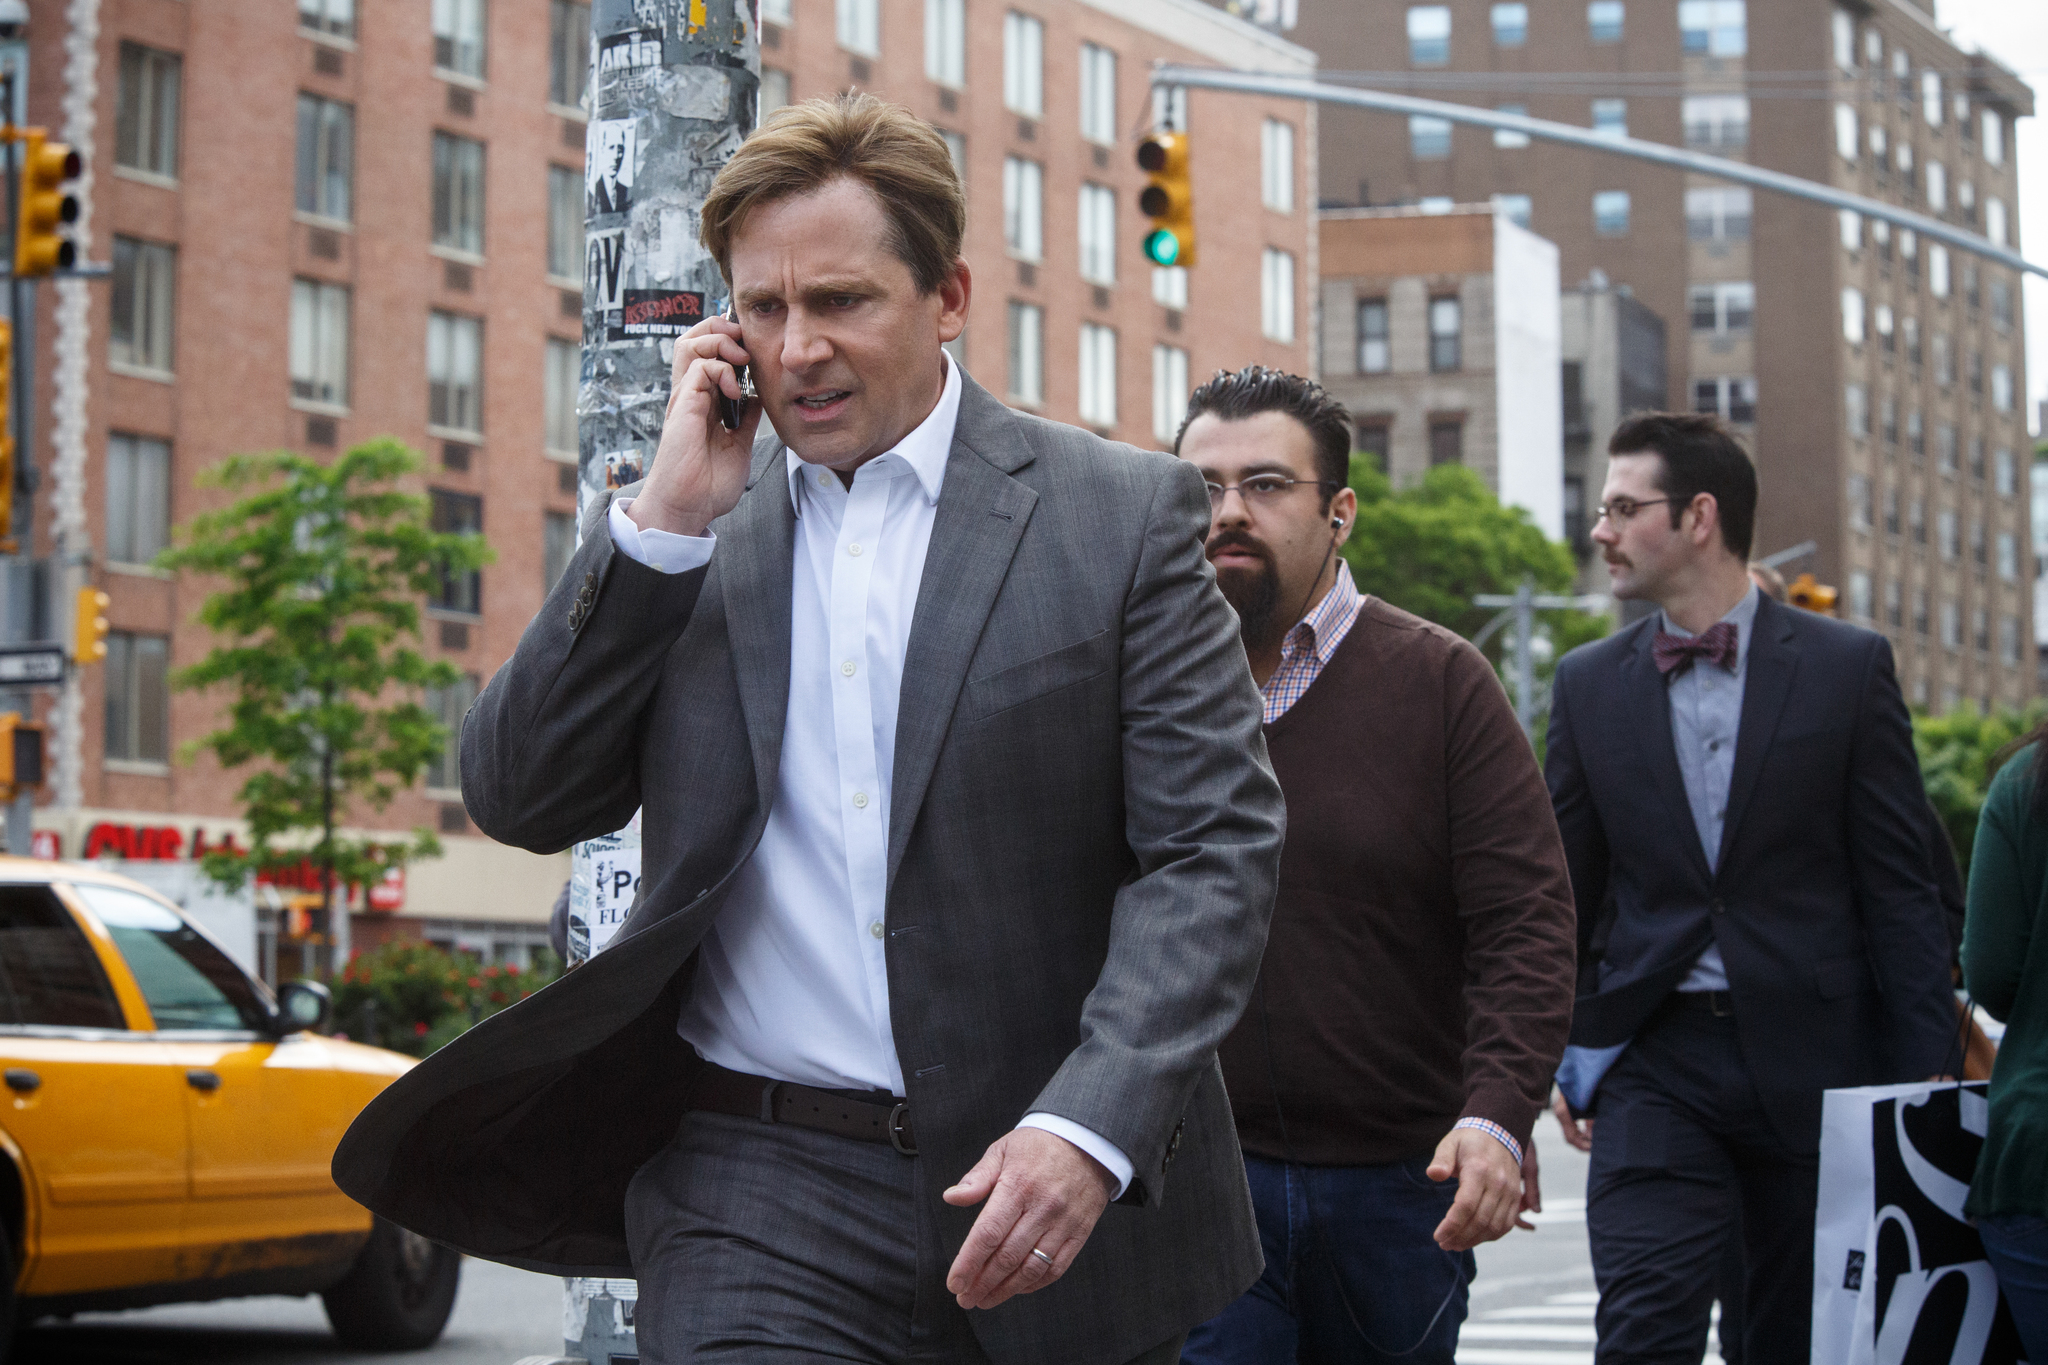 What happened in "The Big Short" movie? Novice investor explanation